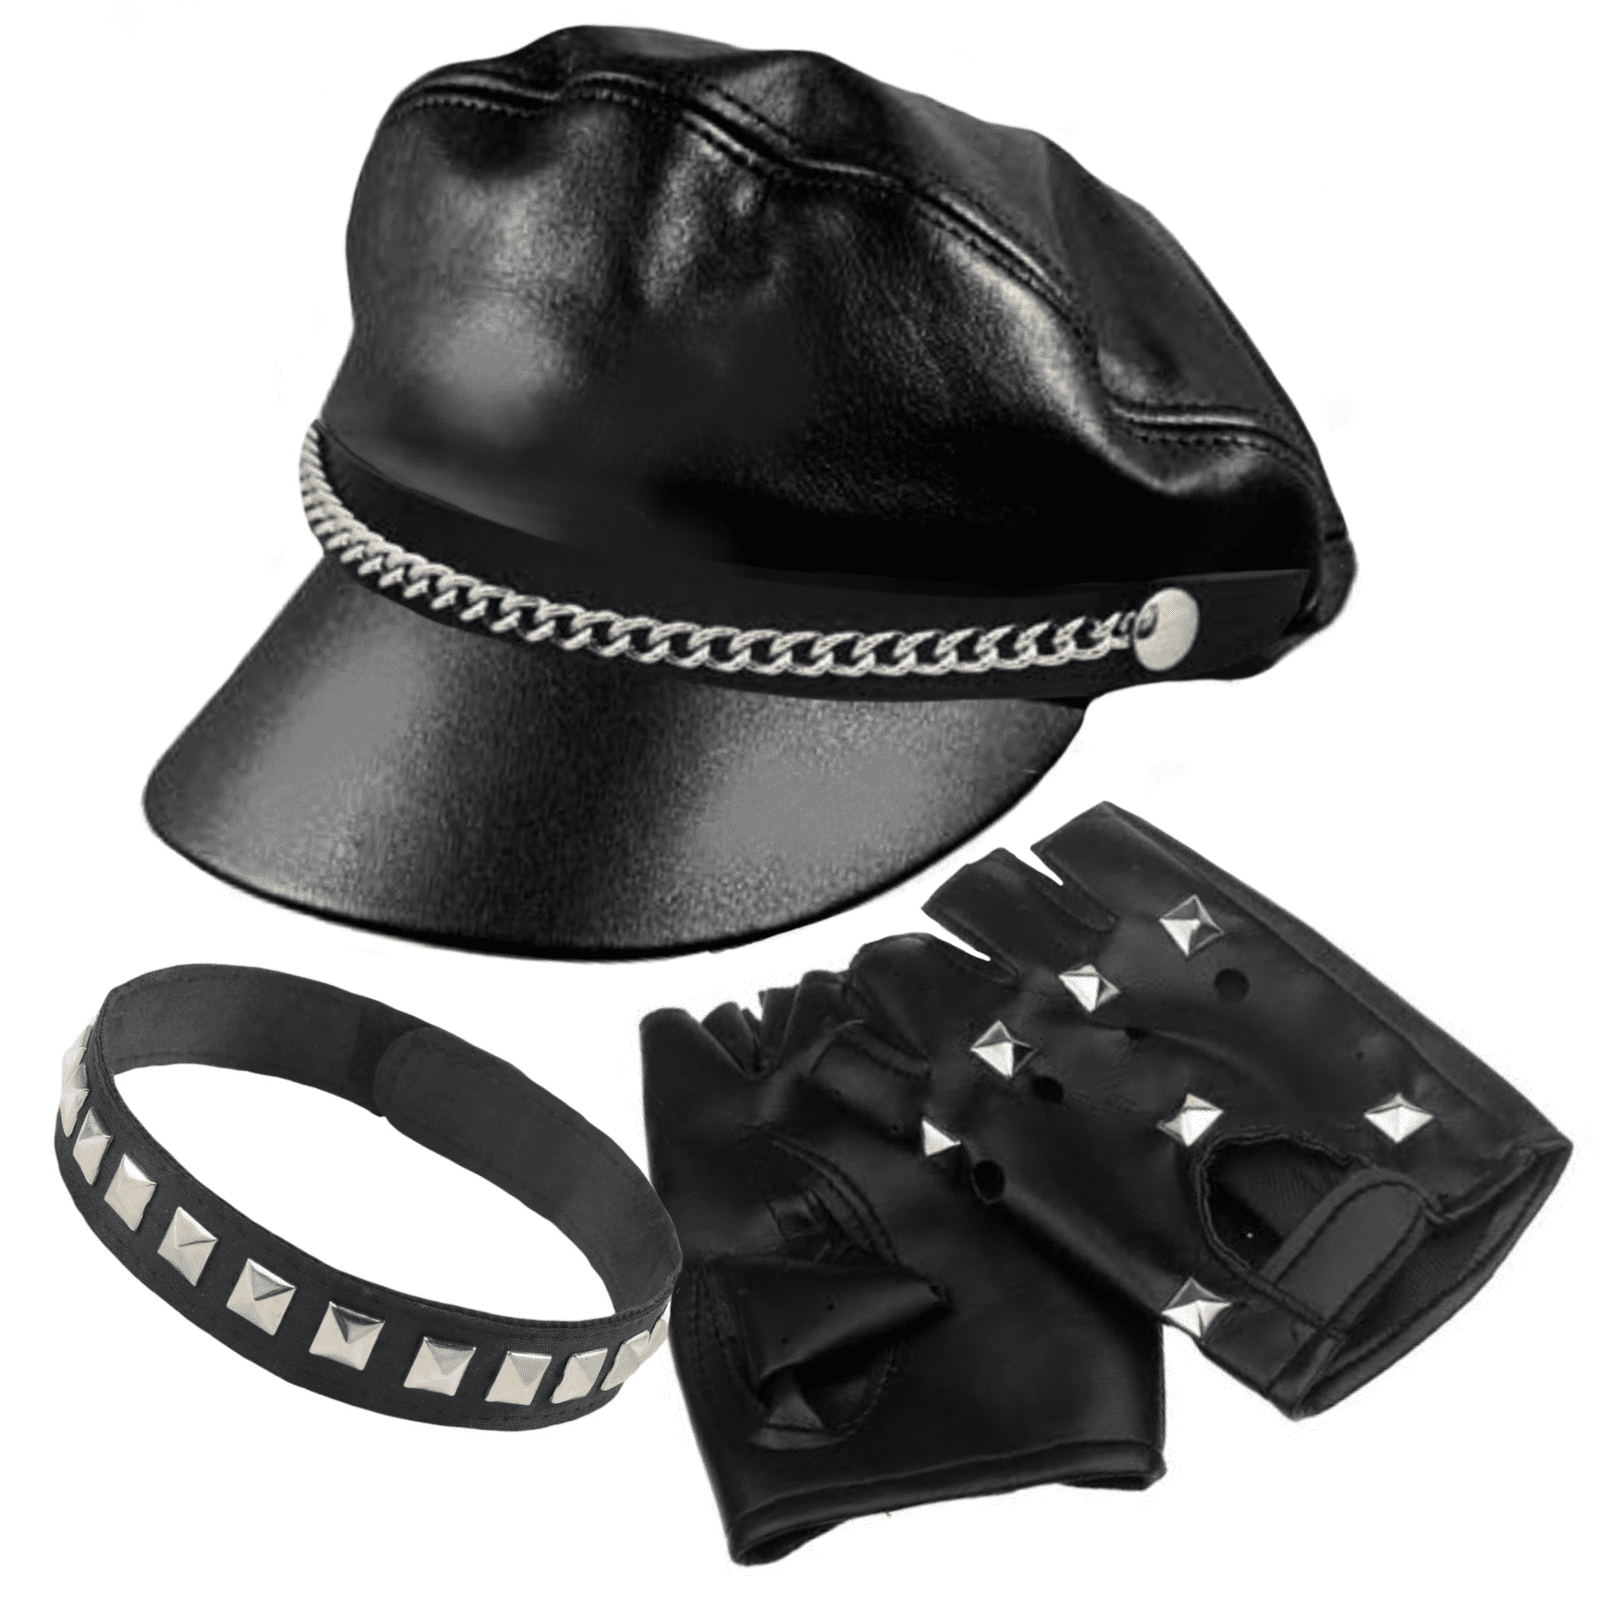 Featured image for “Biker Accessory Kit”